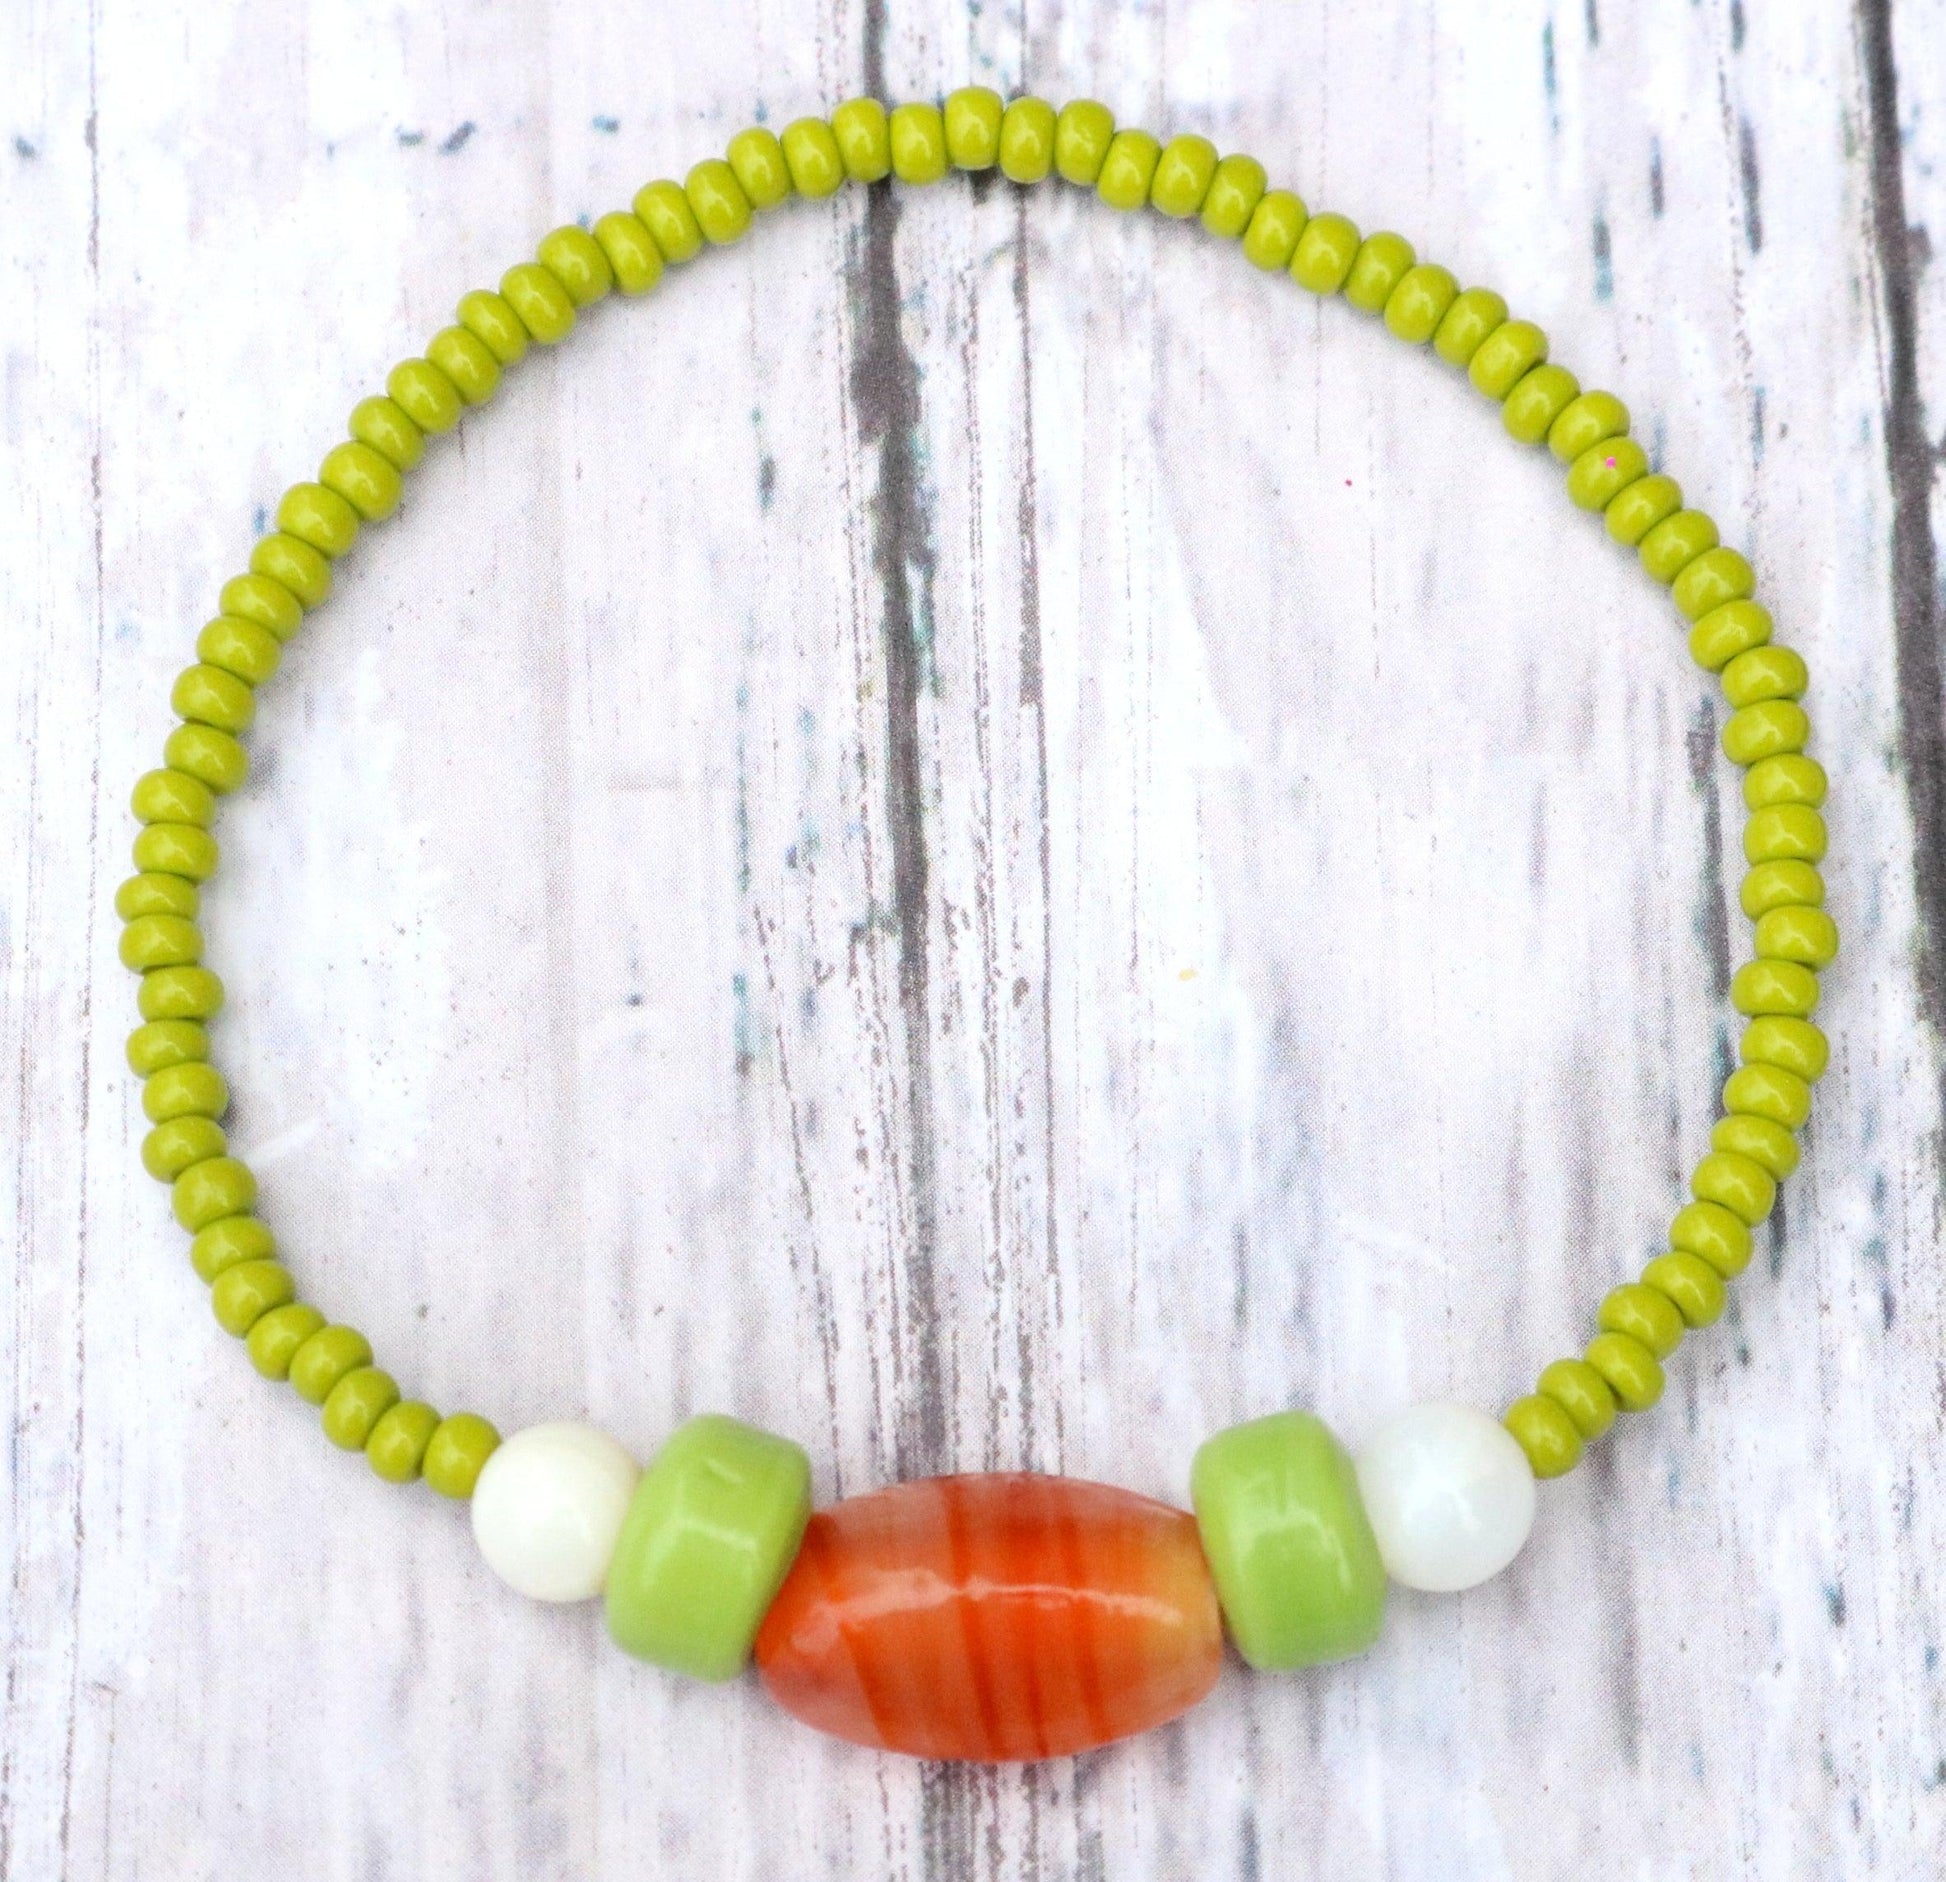 Bunny Hop Carrot Love Easter Treat Orange and Green Glass Bracelet Over View